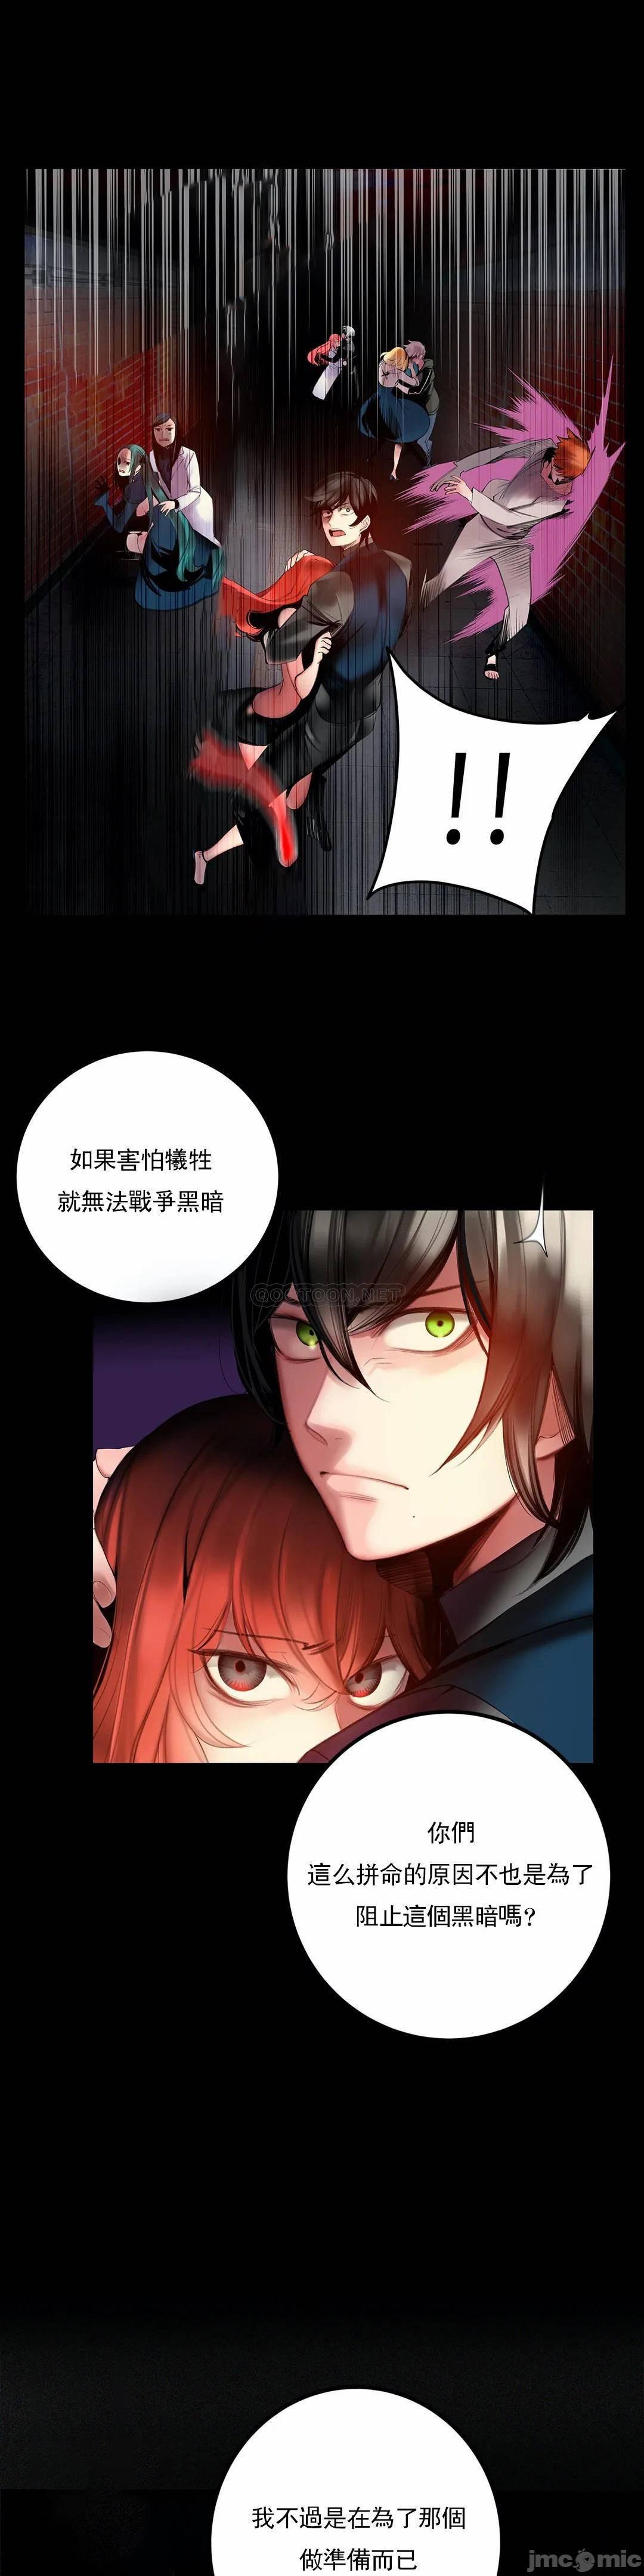 [Juder] Lilith`s Cord (第二季) Ch.77-93 end [Chinese] 377